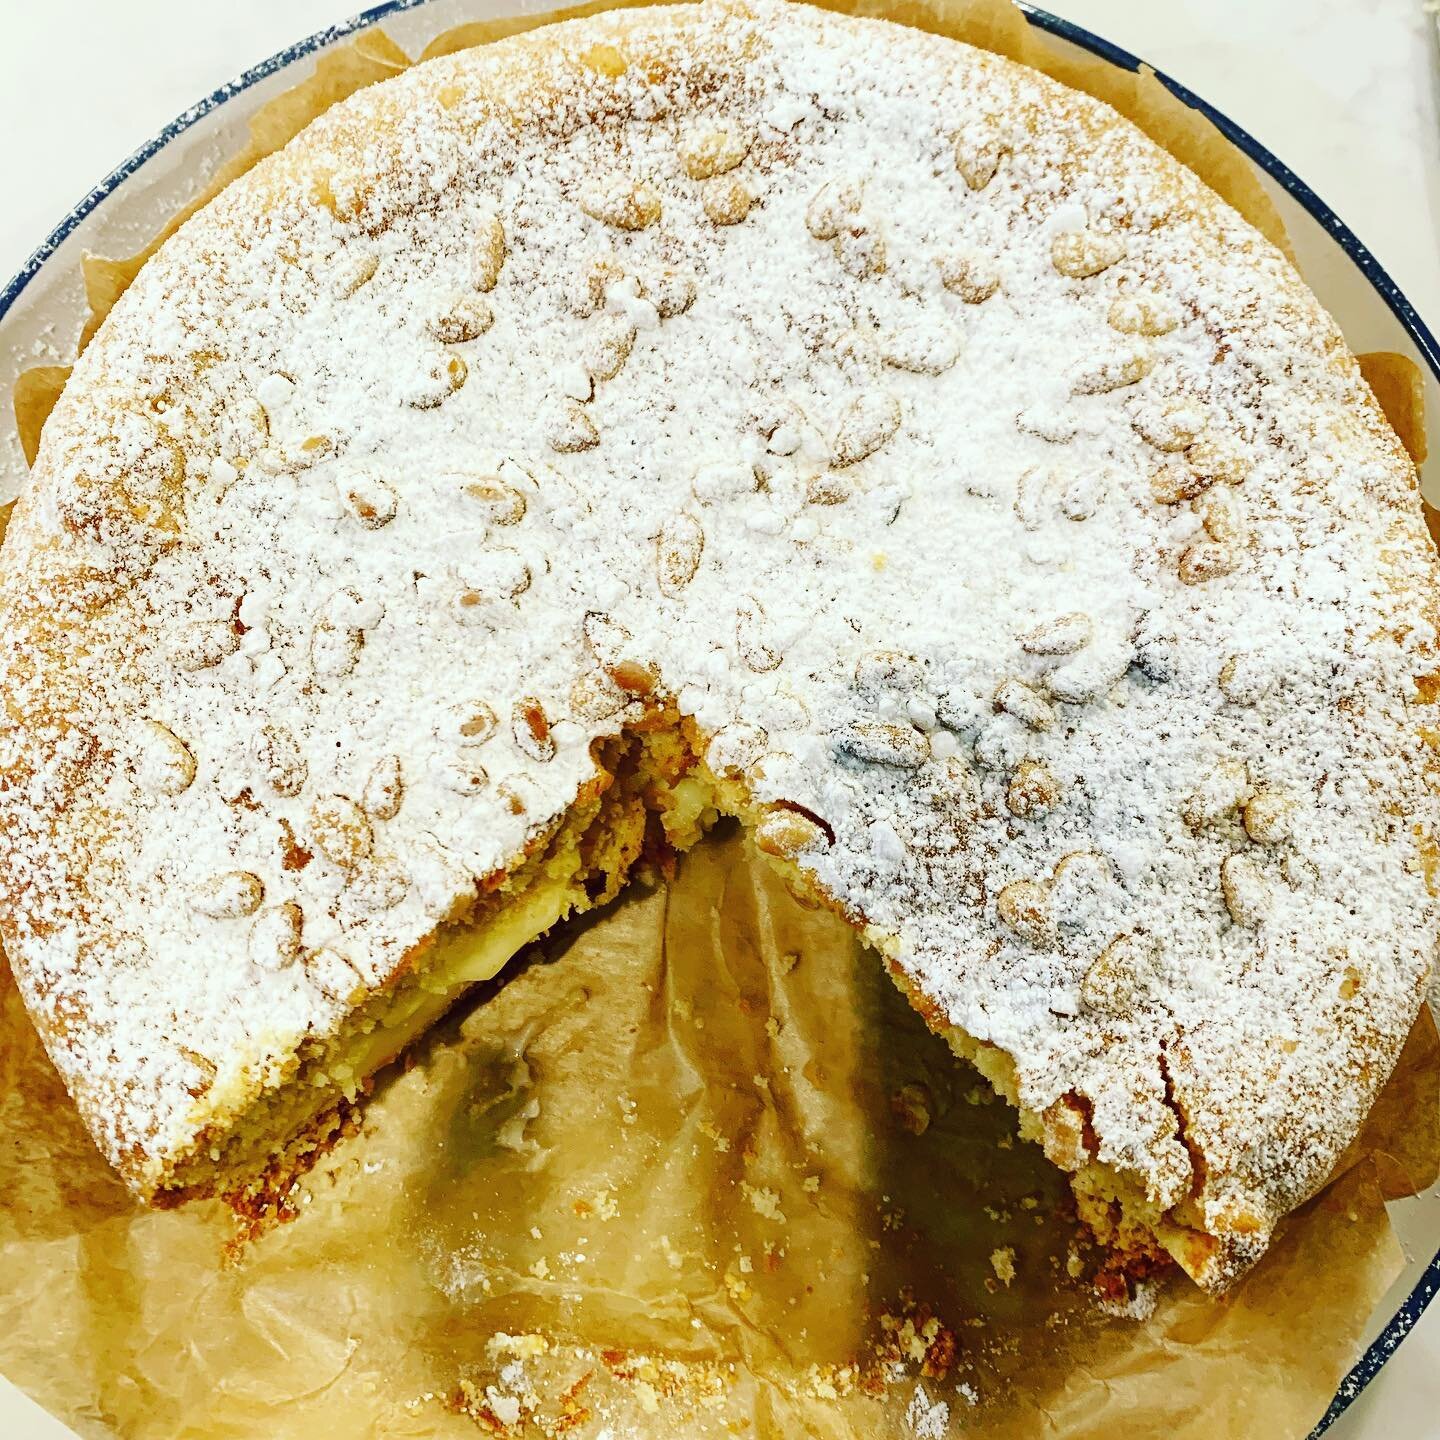 When your lovely neighbours bring you torta della nonna. 😁 And yes, that is custard inside the cake. Absolutely delicious! ❤️ Thank you @io_me_and_myself #treat #tortadellanonna #italianfood #delicious #saturday